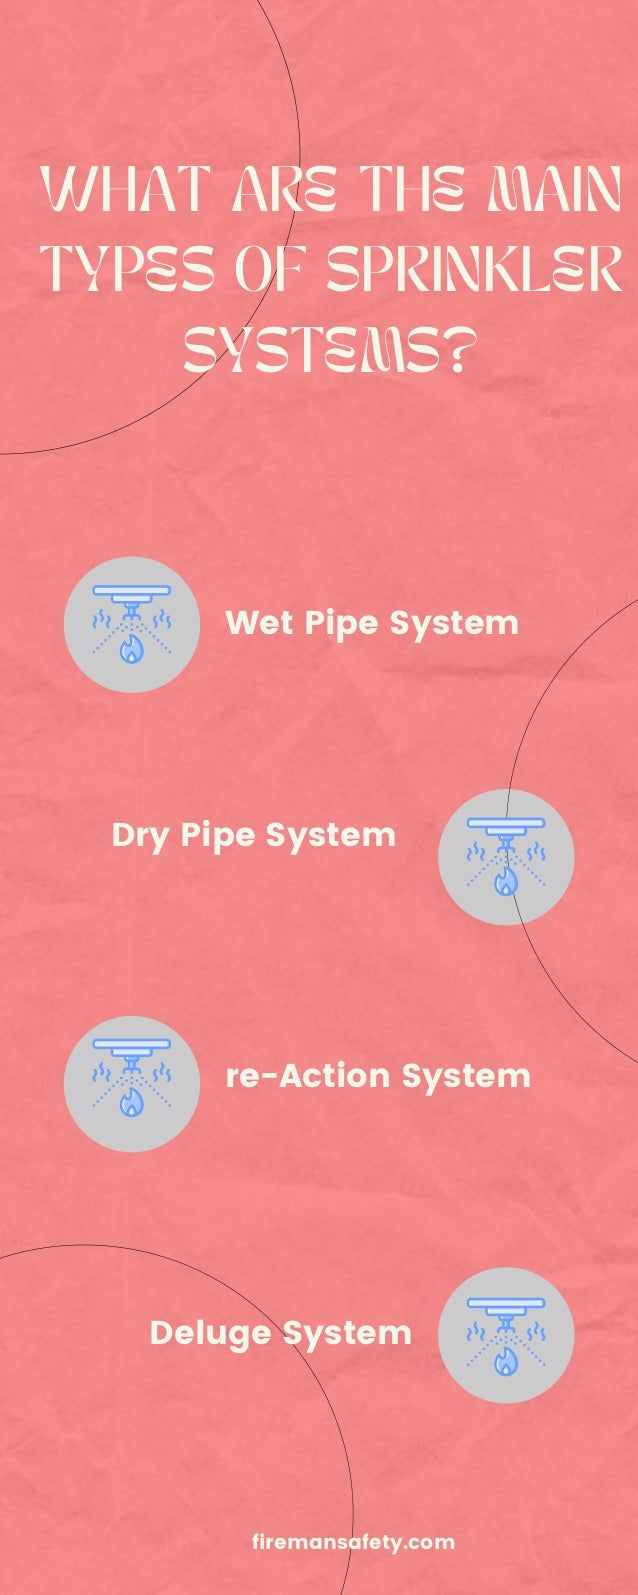 WHAT ARE THE MAIN
TYPES OF SPRINKLER
SYSTEMS?
Wet Pipe System
re-Action System
Dry Pipe System
Deluge System
firemansafety.com
 